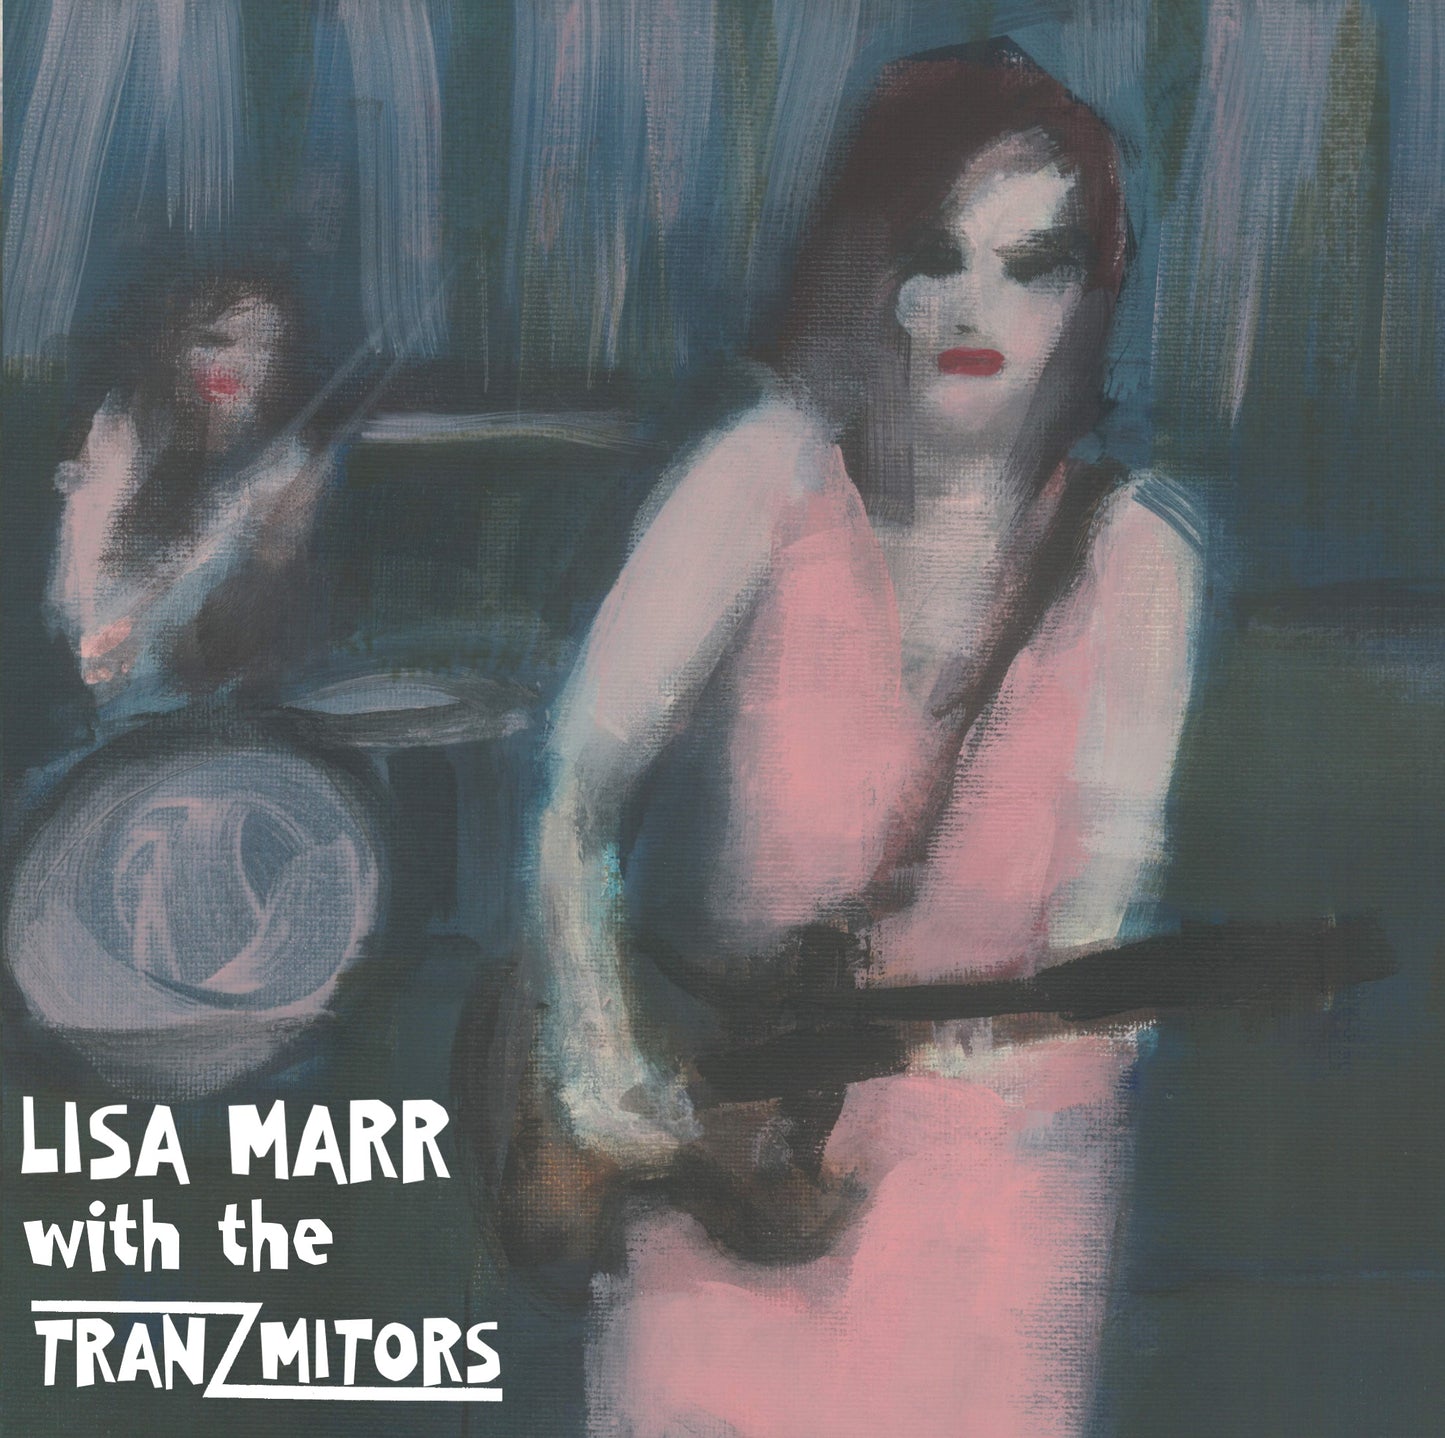 Lisa Marr with the Tranzmitors 7"